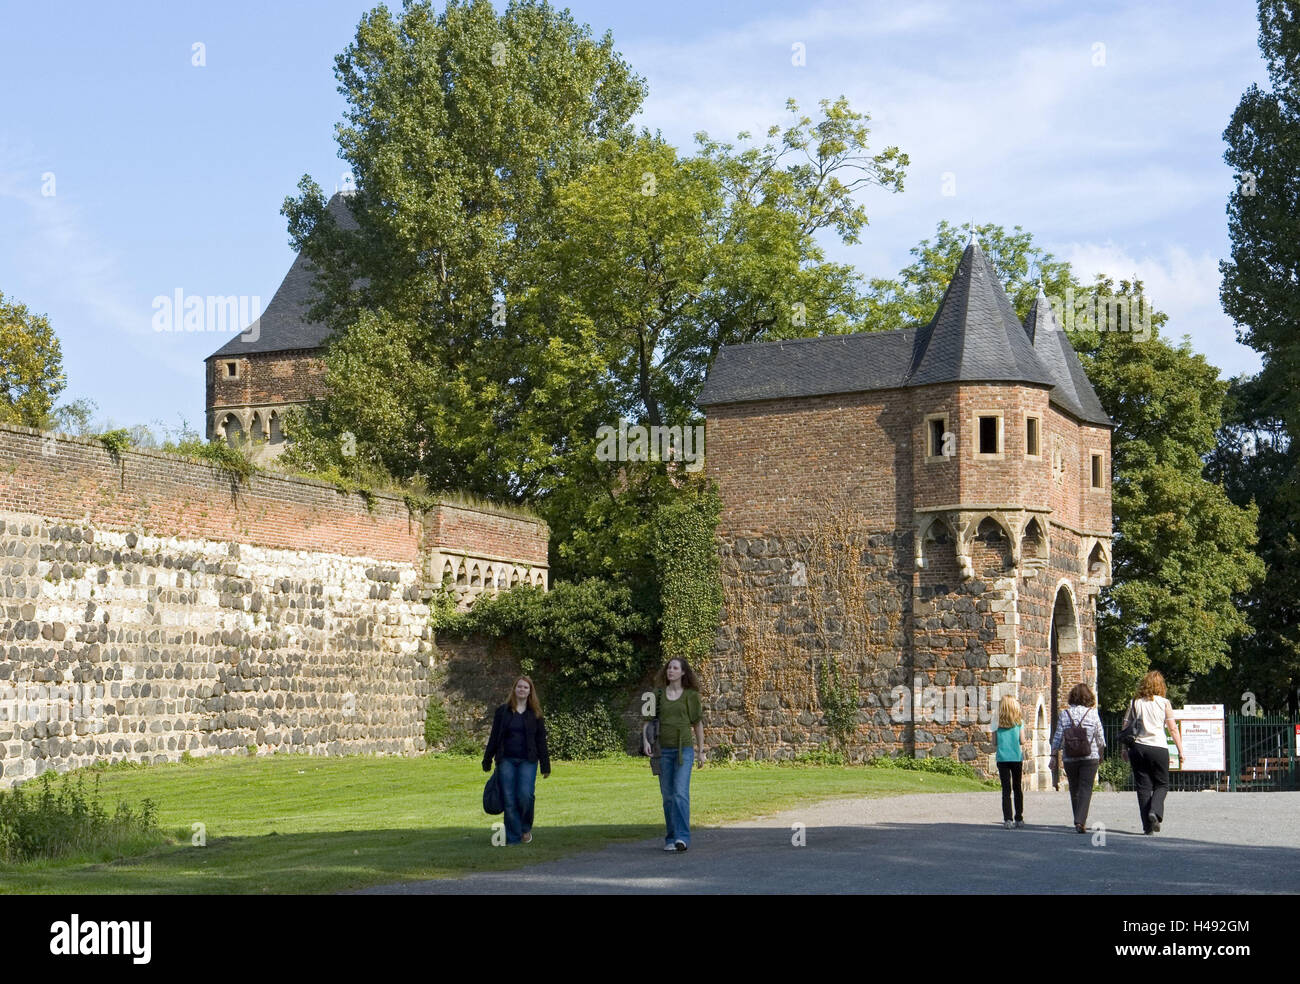 Germany, North Rhine-Westphalia, Dormagen-Zons, castle peace current, city wall, tourist, Dormagen, Zons, inch fortress, fortress, castle goal, defensive wall, brick, brick defensive wall, place of interest, tourism, person, sunshine, Stock Photo